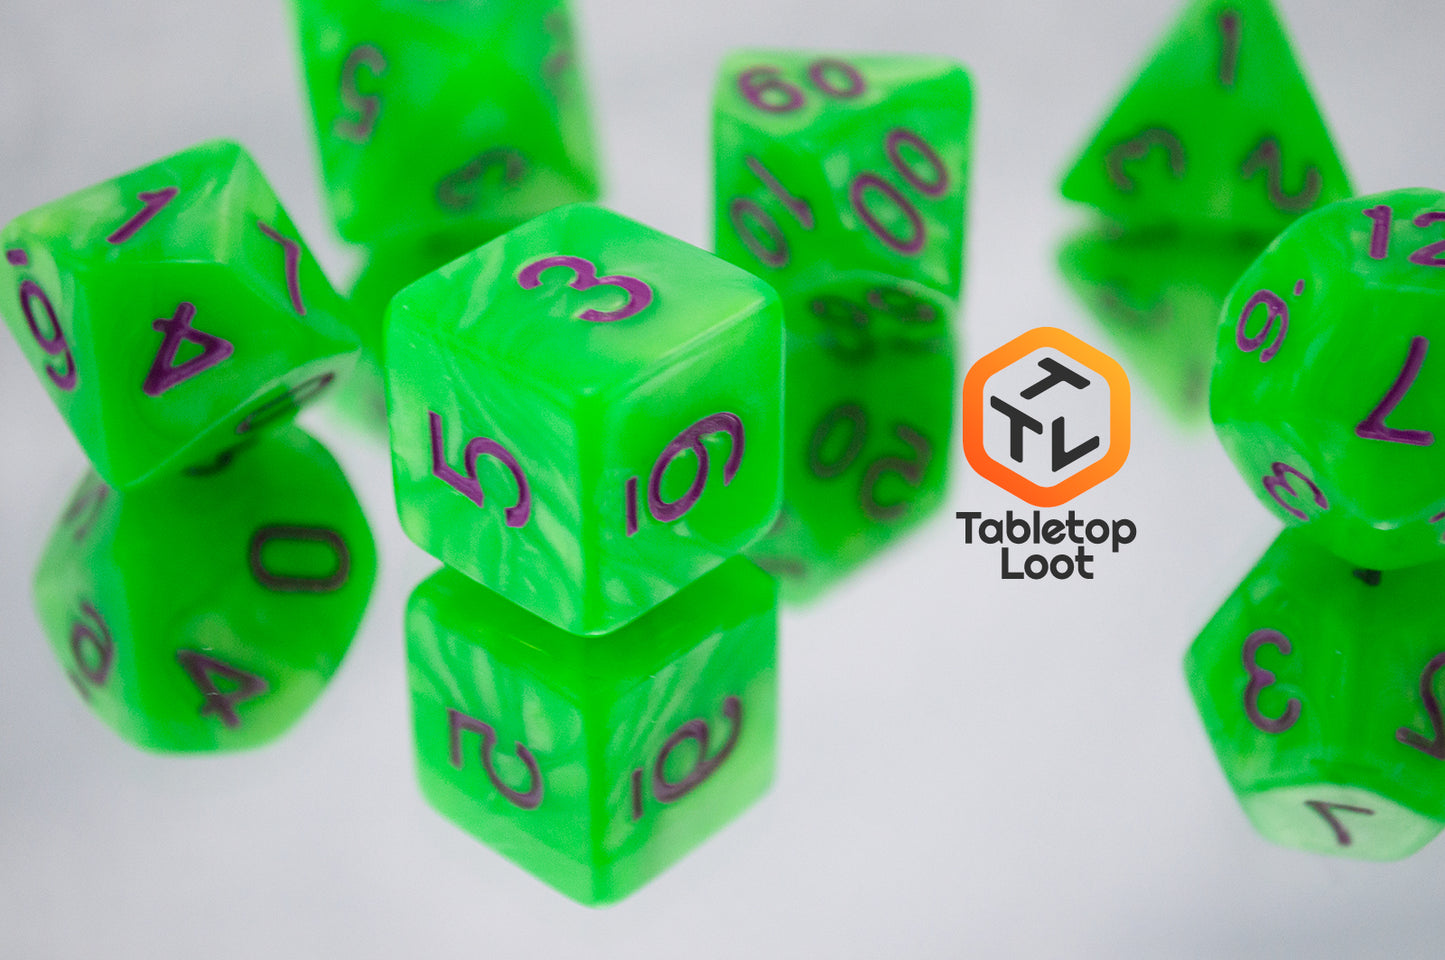 A close up of the Radioactive Green 7 piece dice set from Tabletop Loot with bright green resin and purple numbering.